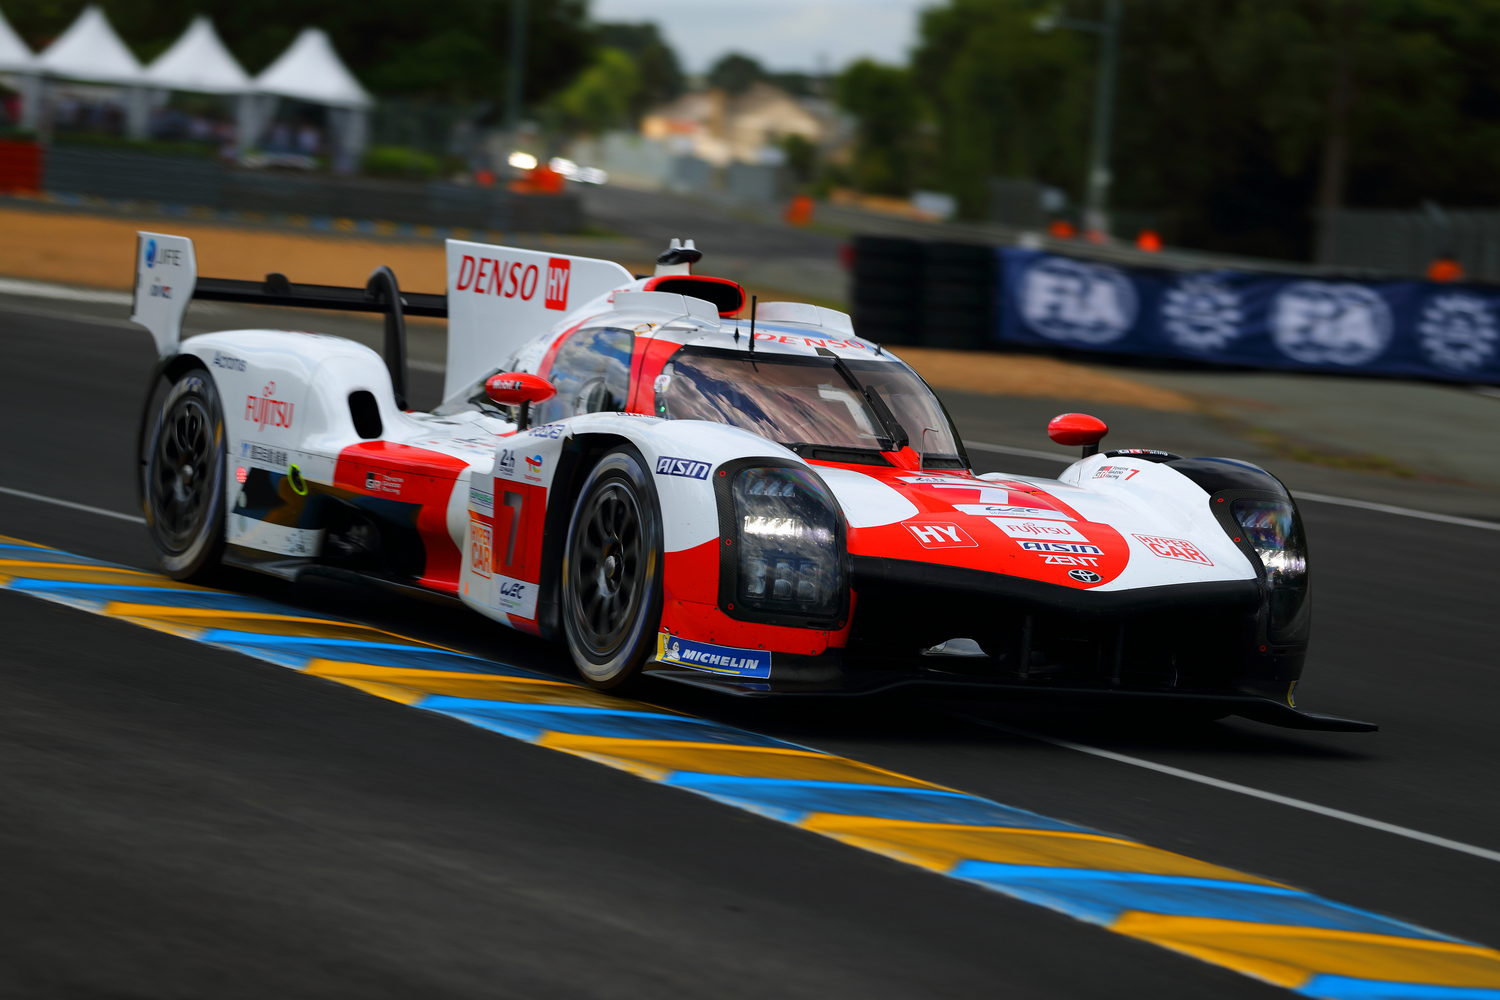 Le Mans 2023 to be jewel of endurance racing